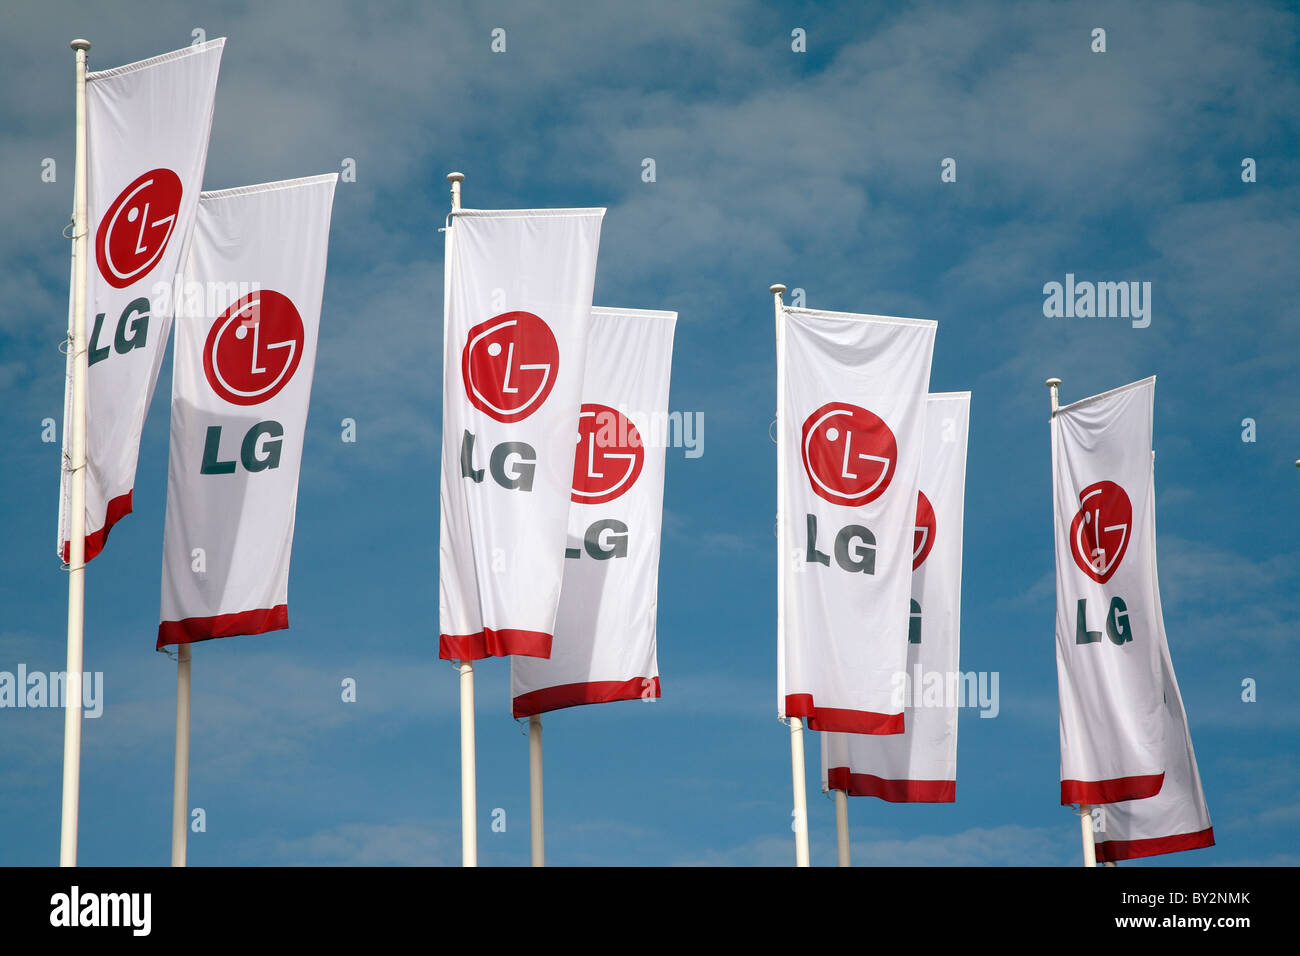 The logo of LG on flags at IFA 2008, Berlin, Germany Stock Photo